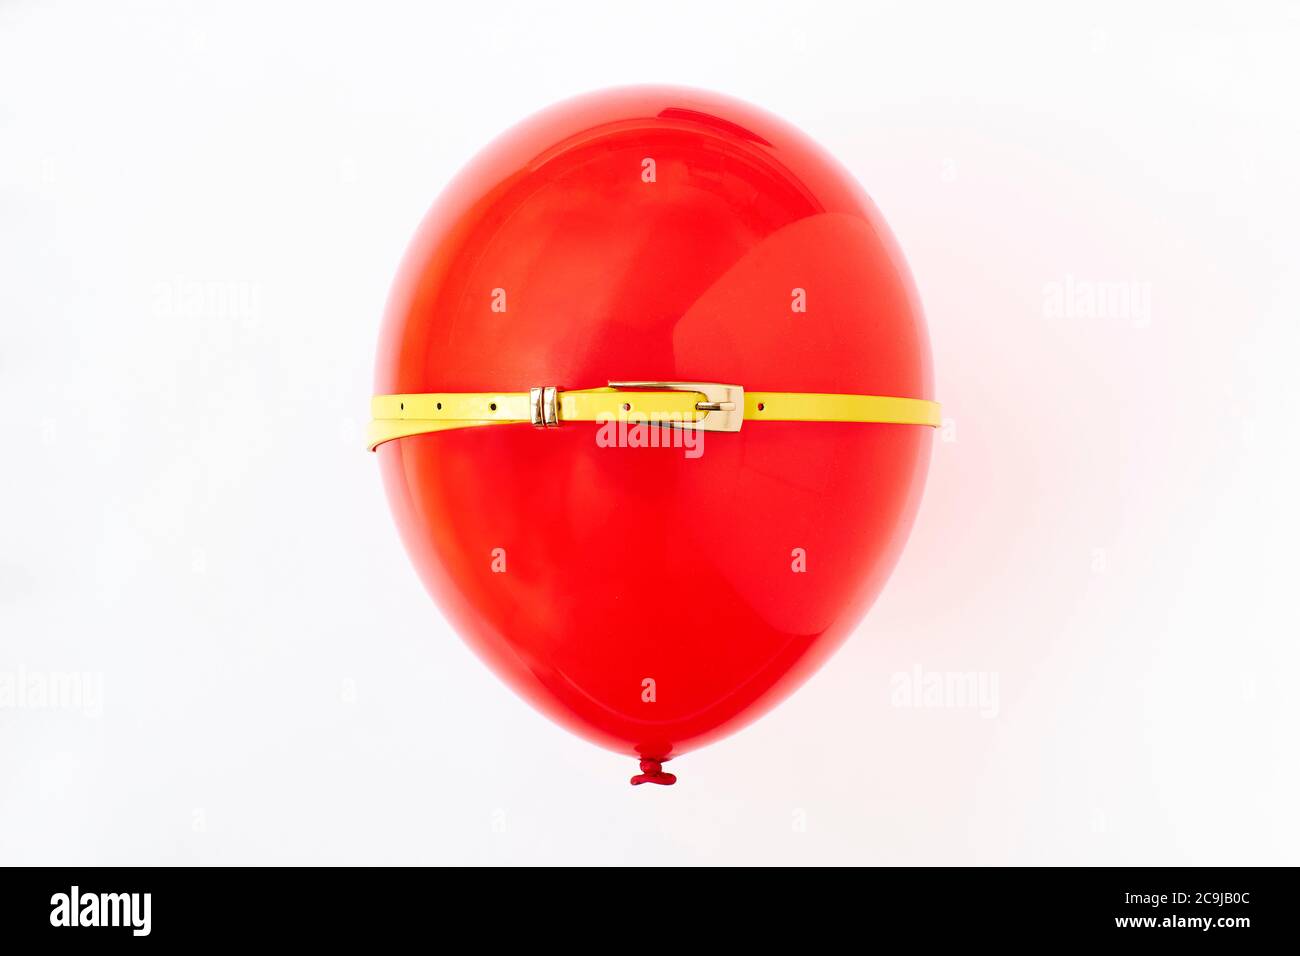 Red balloon with yellow belt, conceptual image of bloated stomach. Stock Photo